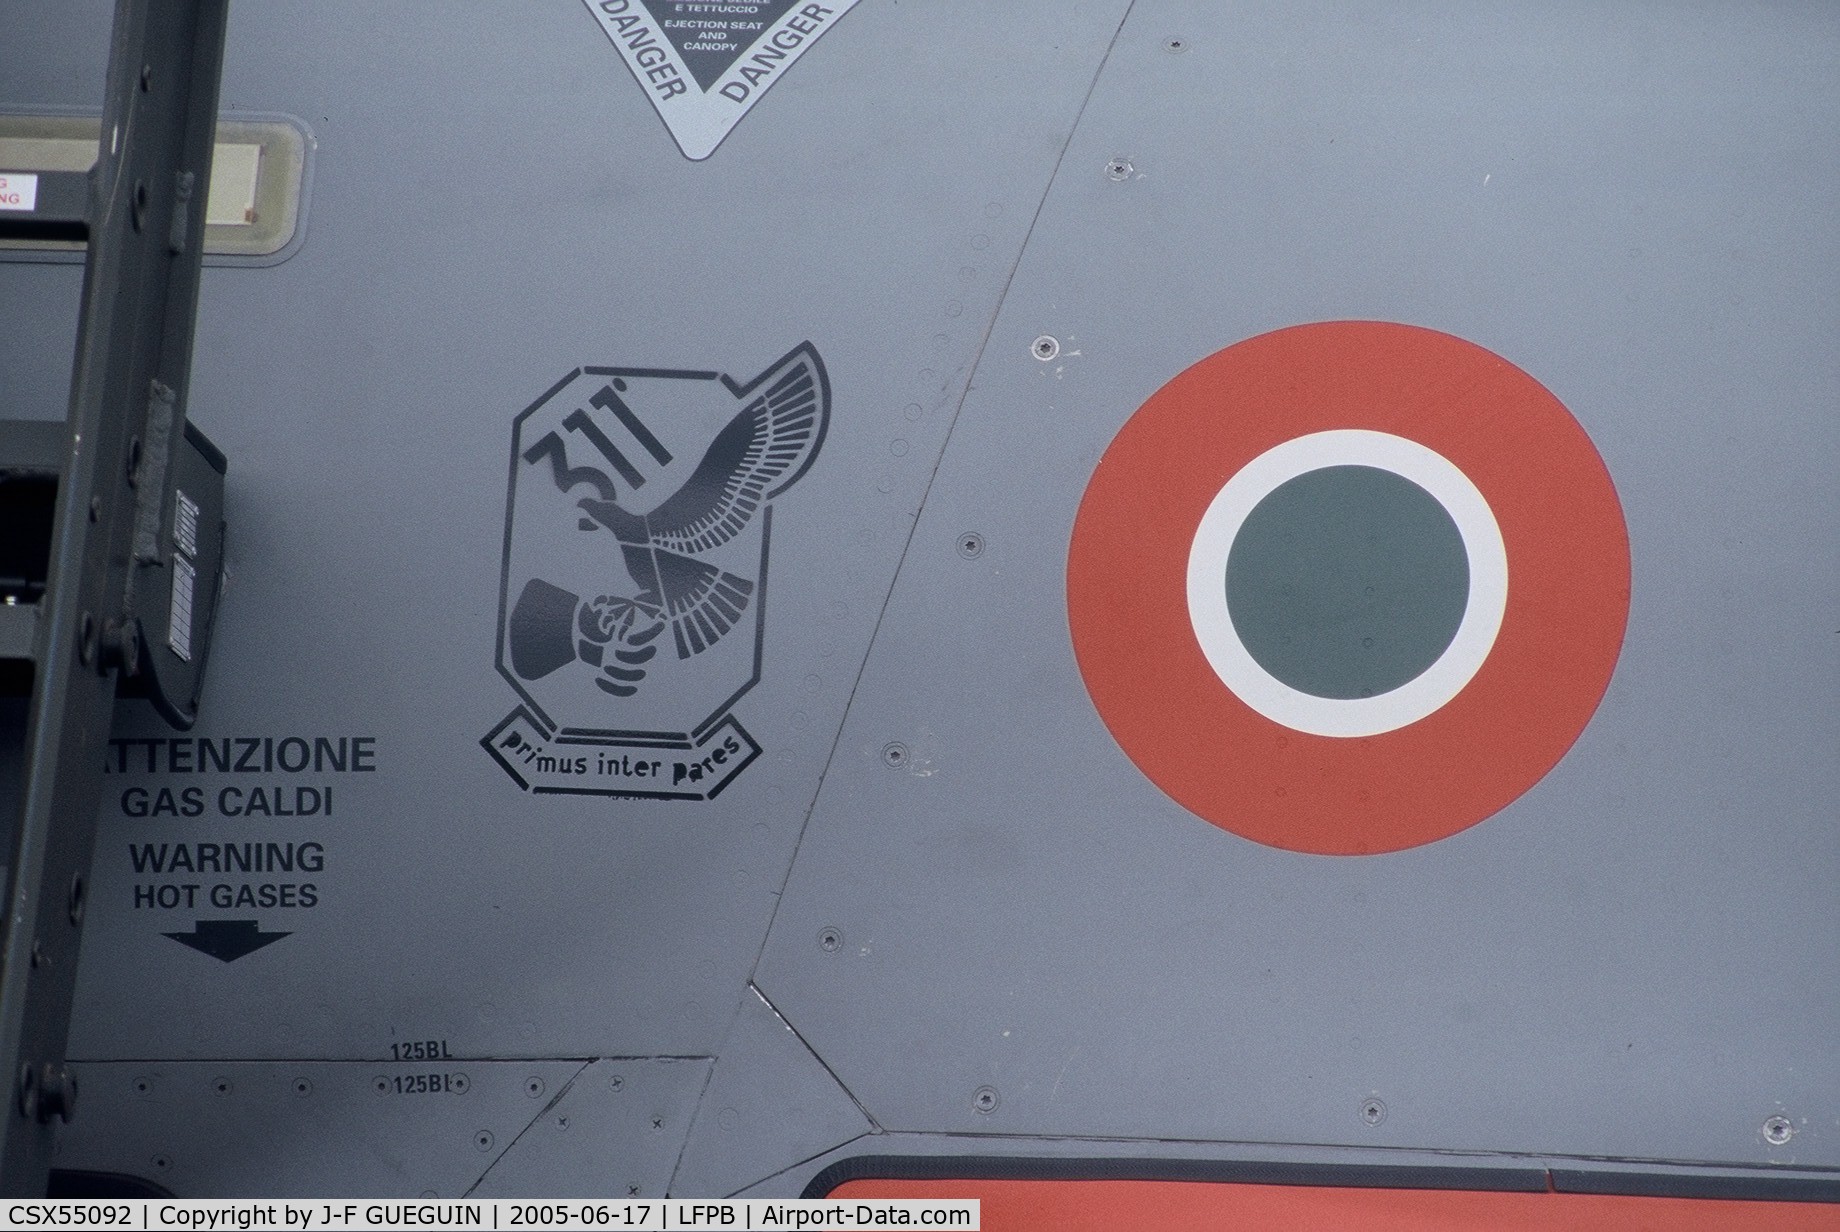 CSX55092, 2003 Eurofighter EF-2000 Typhoon T C/N IT001, On display at Paris-Le Bourget 2005 airshow (badge of 311° Gruppo/Reparto Sperimentale Volo, based at Pratica di Mare).